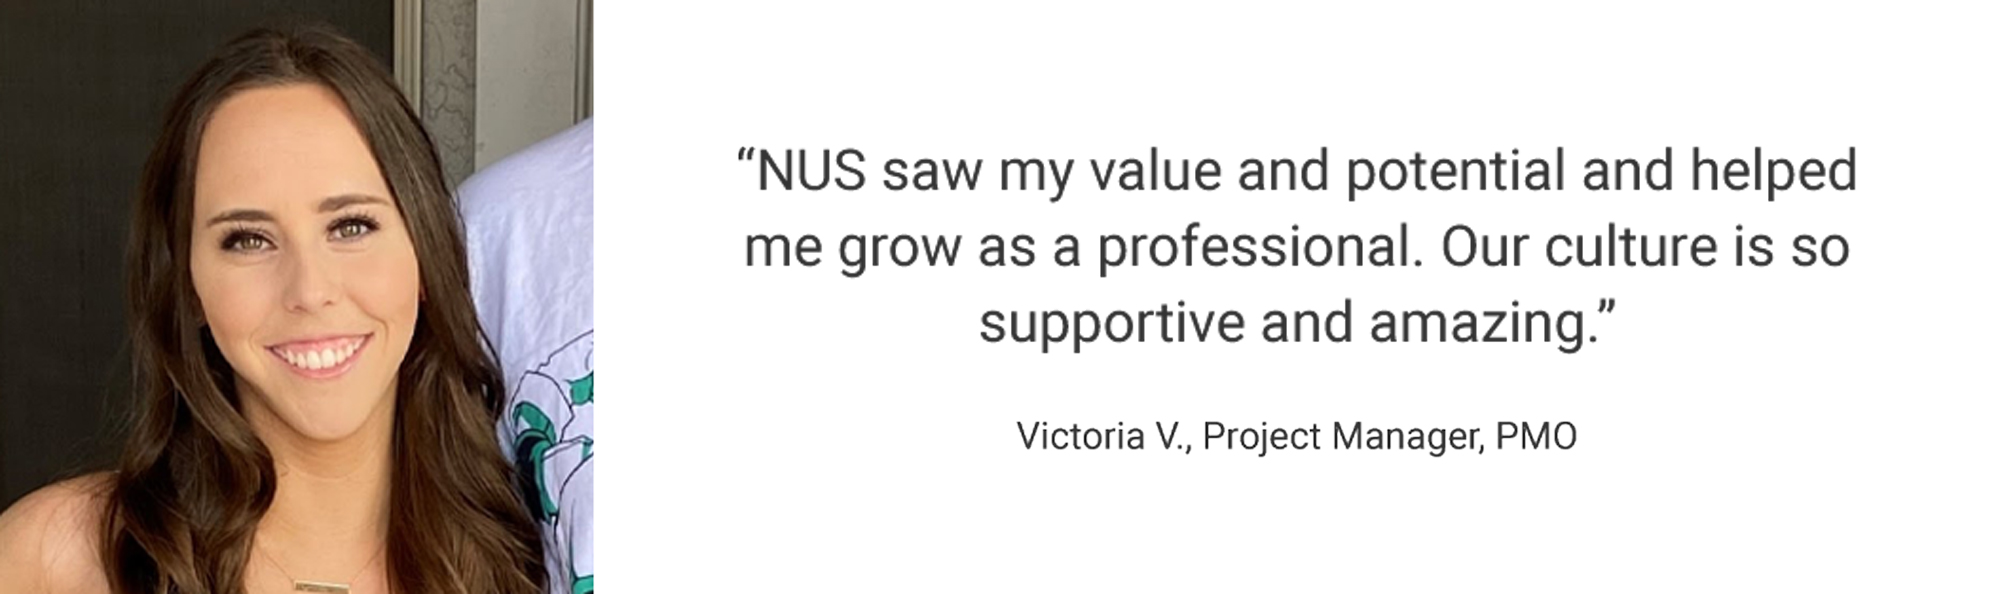 Employee Testimonial, "NUS saw my value and potential and helped me grow as a professional. Our culture is so supportive and amazing." Victoria V., Project Manager, PMO